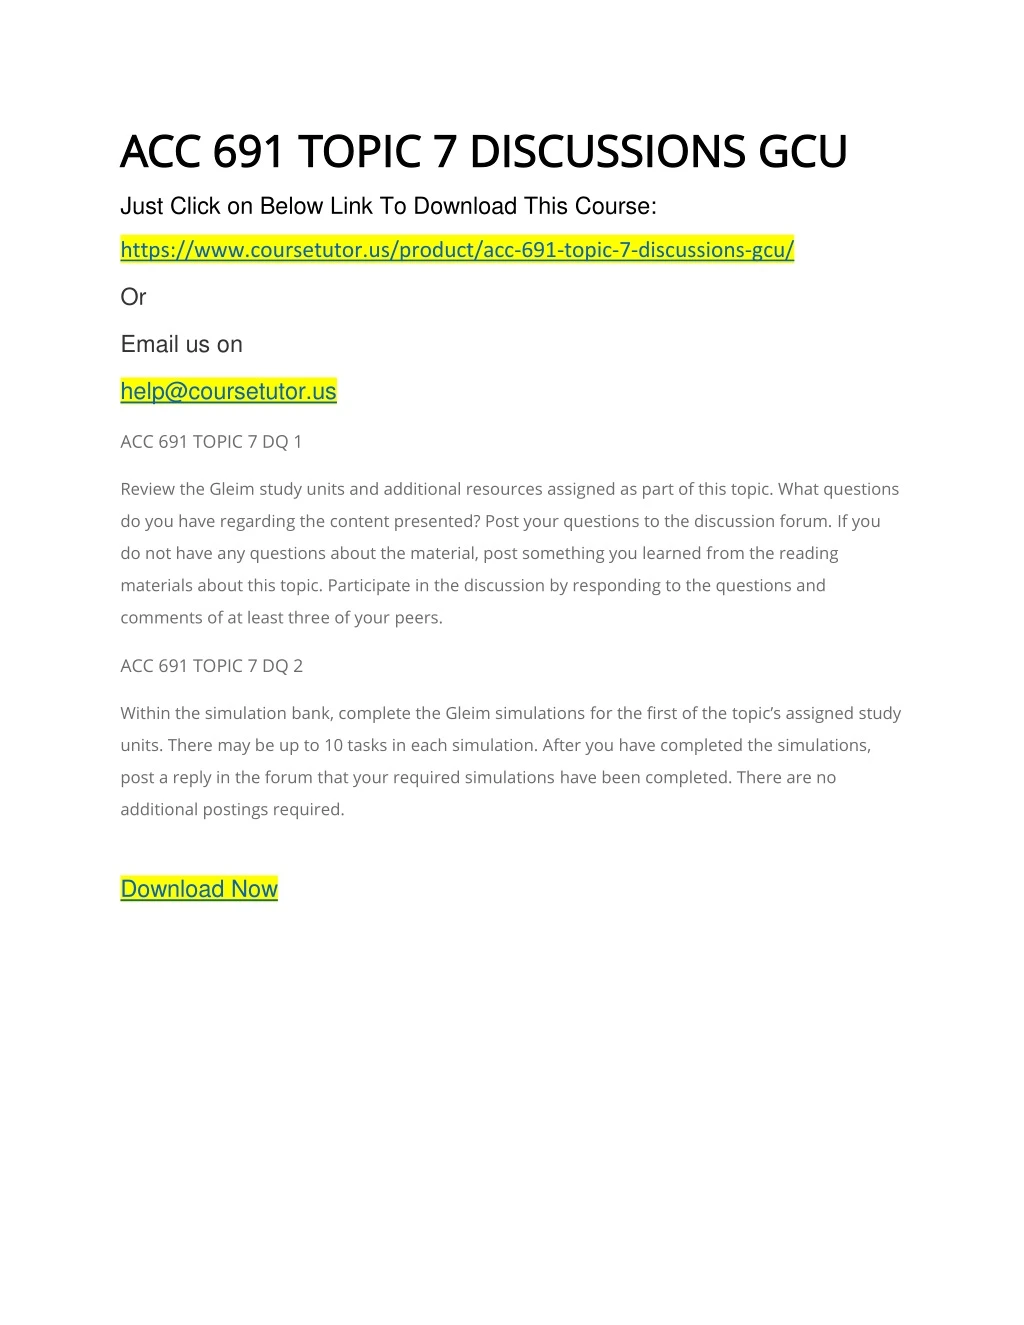 acc 691 topic 7 disc acc 691 topic 7 discussions